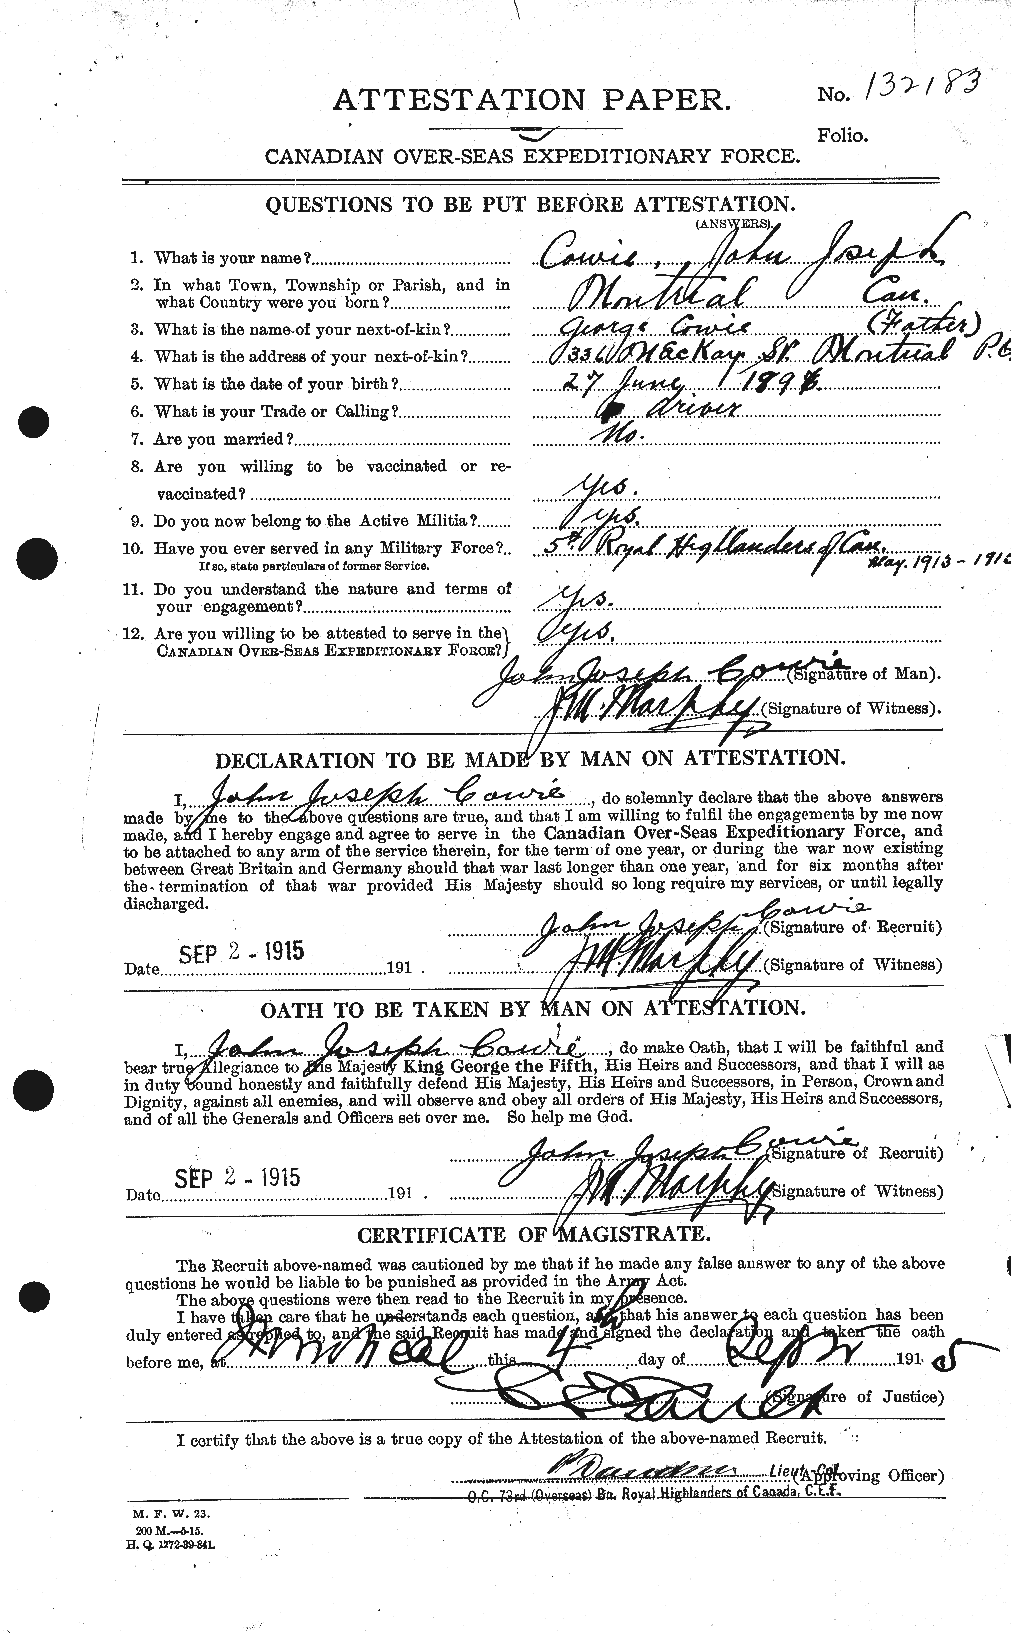 Personnel Records of the First World War - CEF 059999a